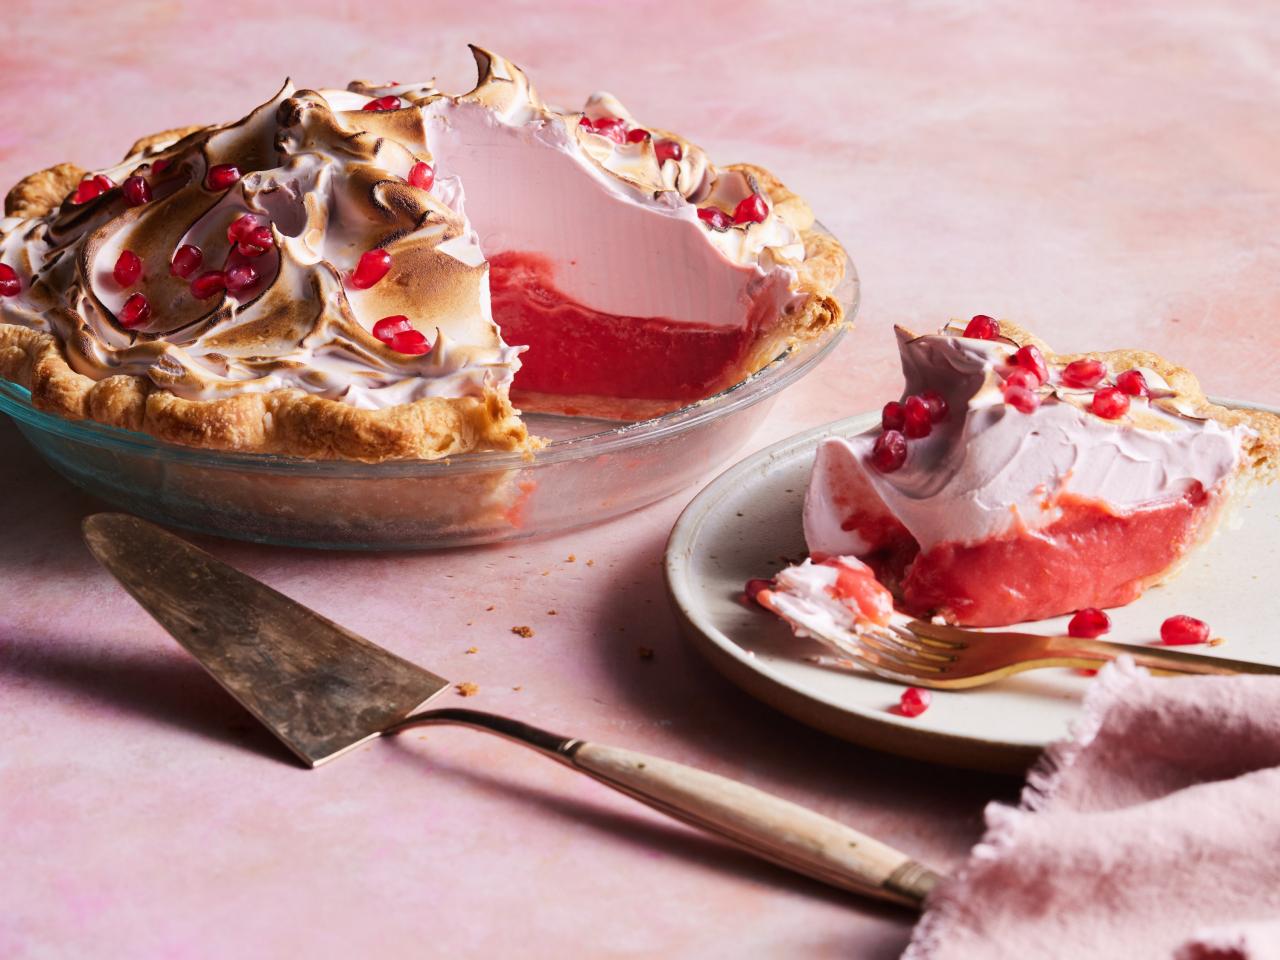 Indulge in Wholesome Sweetness with Healthy Dessert Tips